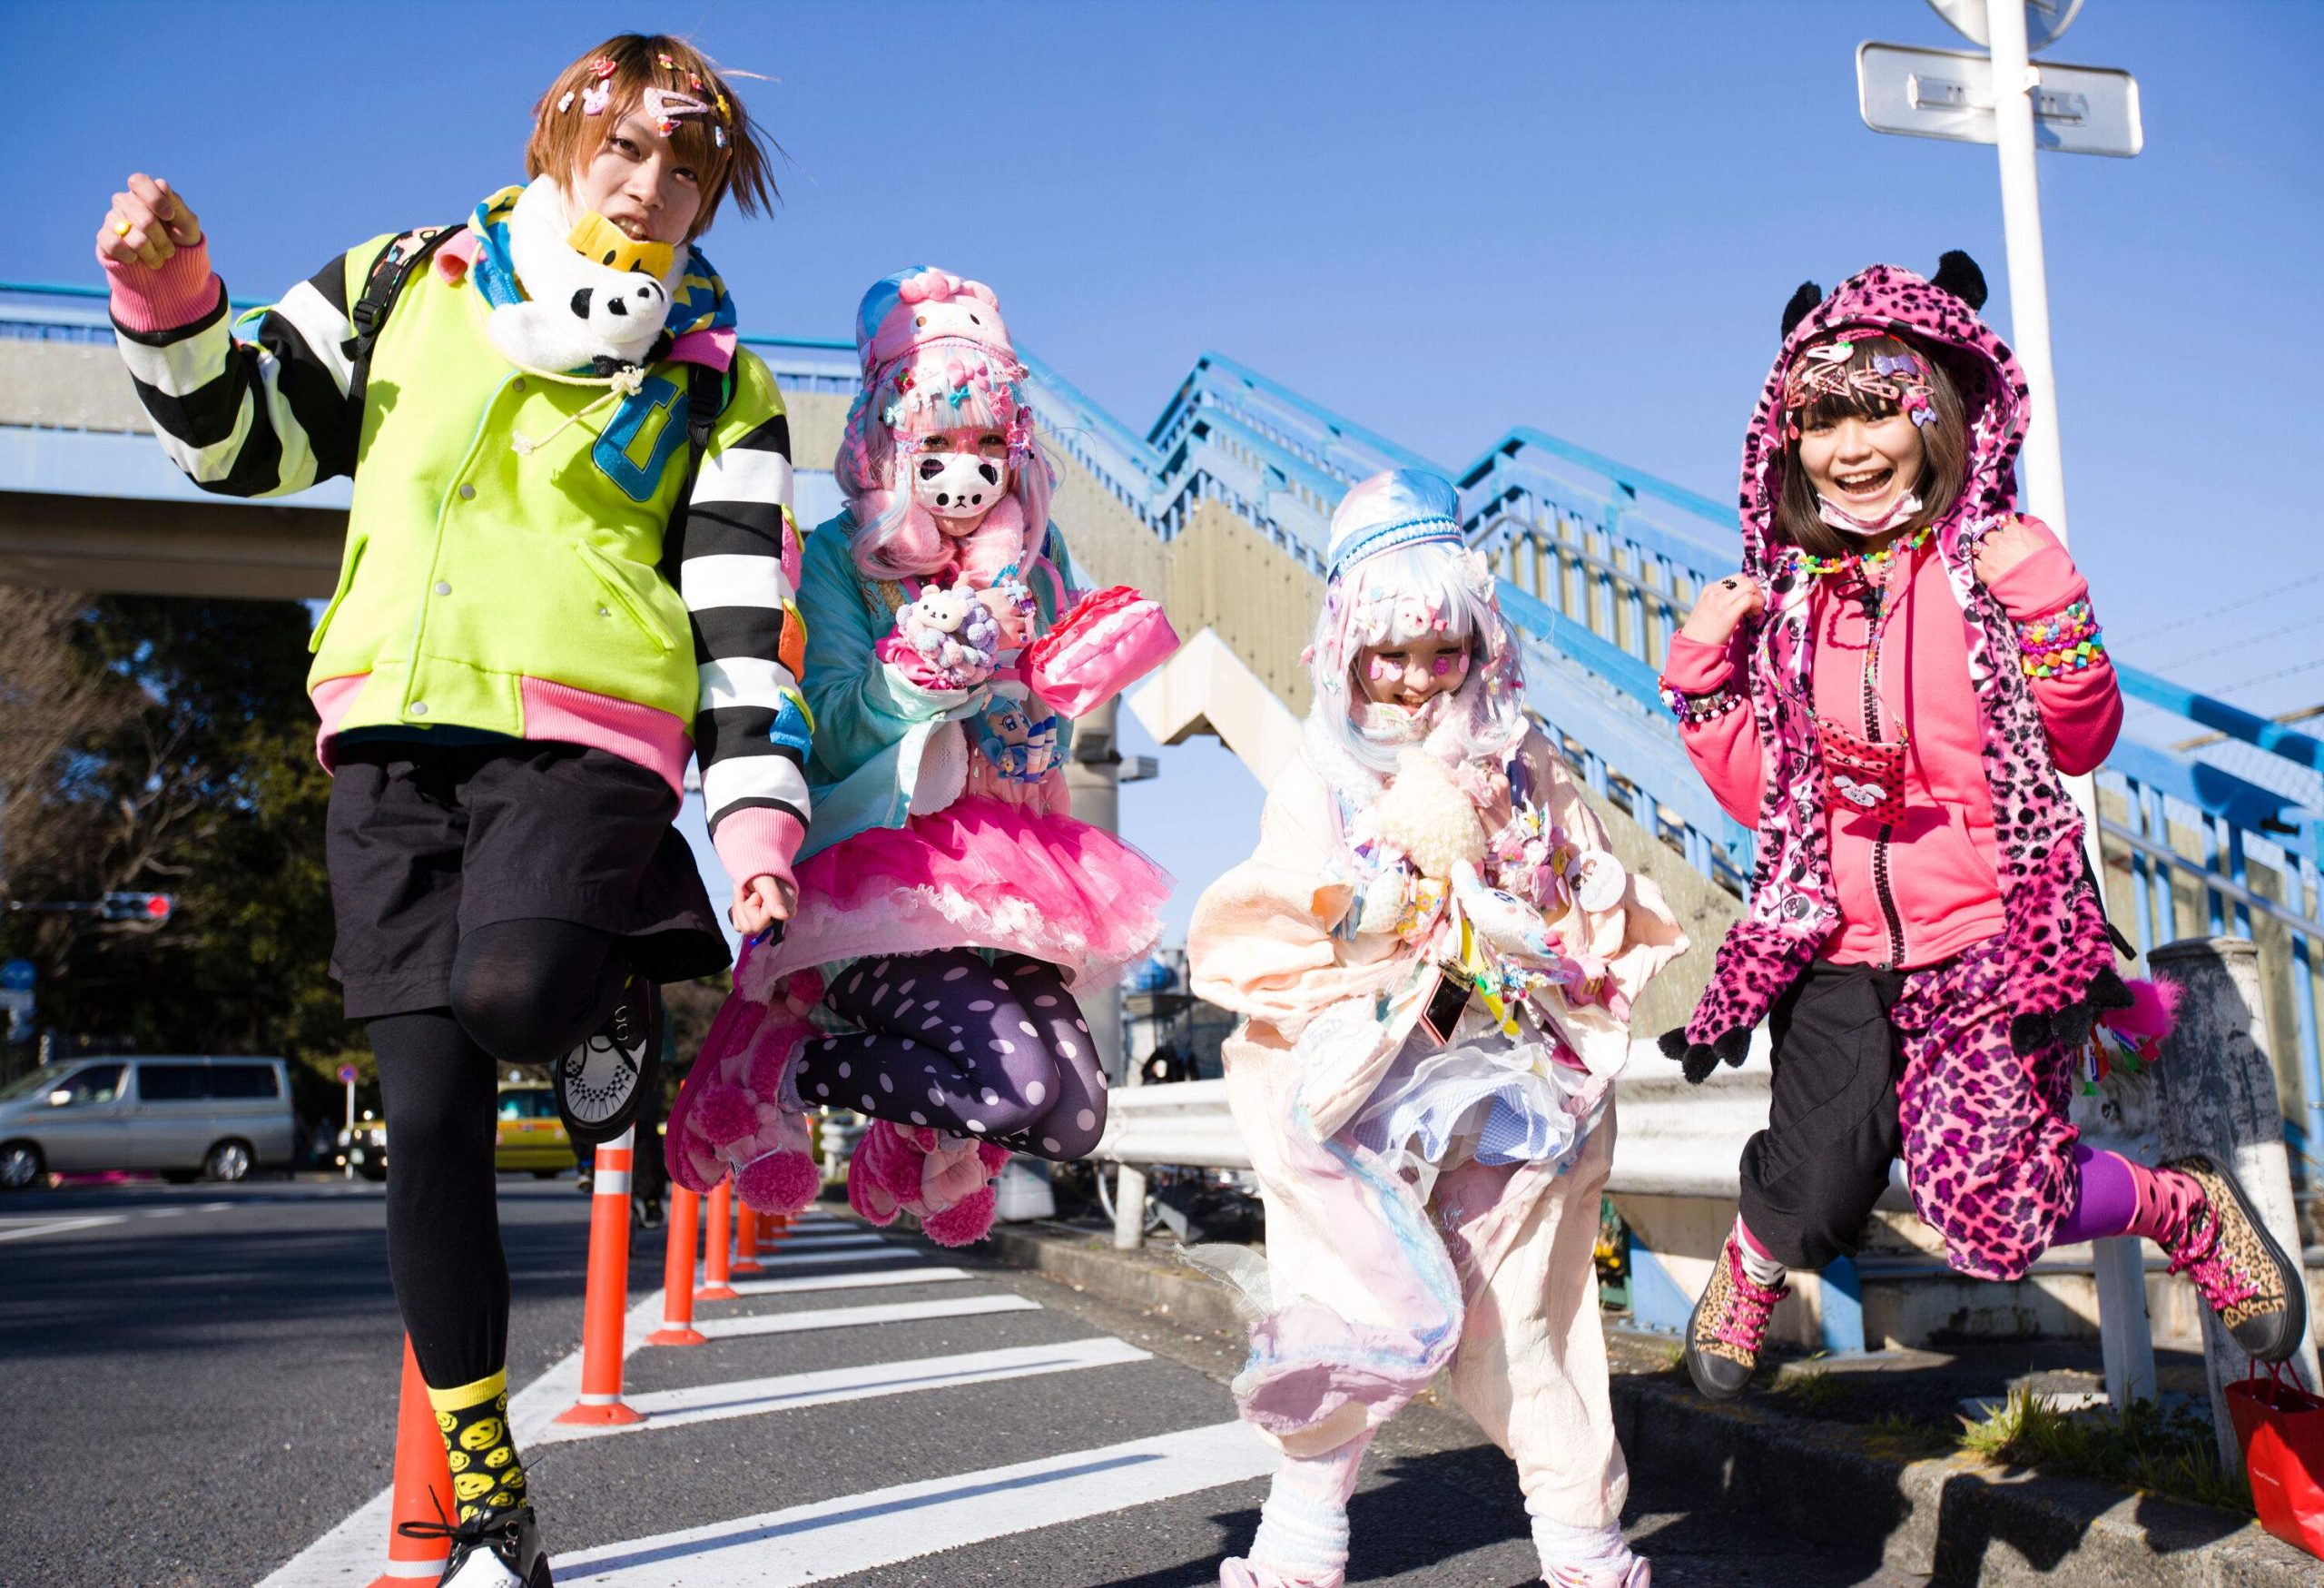 Four joyful individuals wearing vibrant clothing were captured mid-air while doing a jump shot in a street.